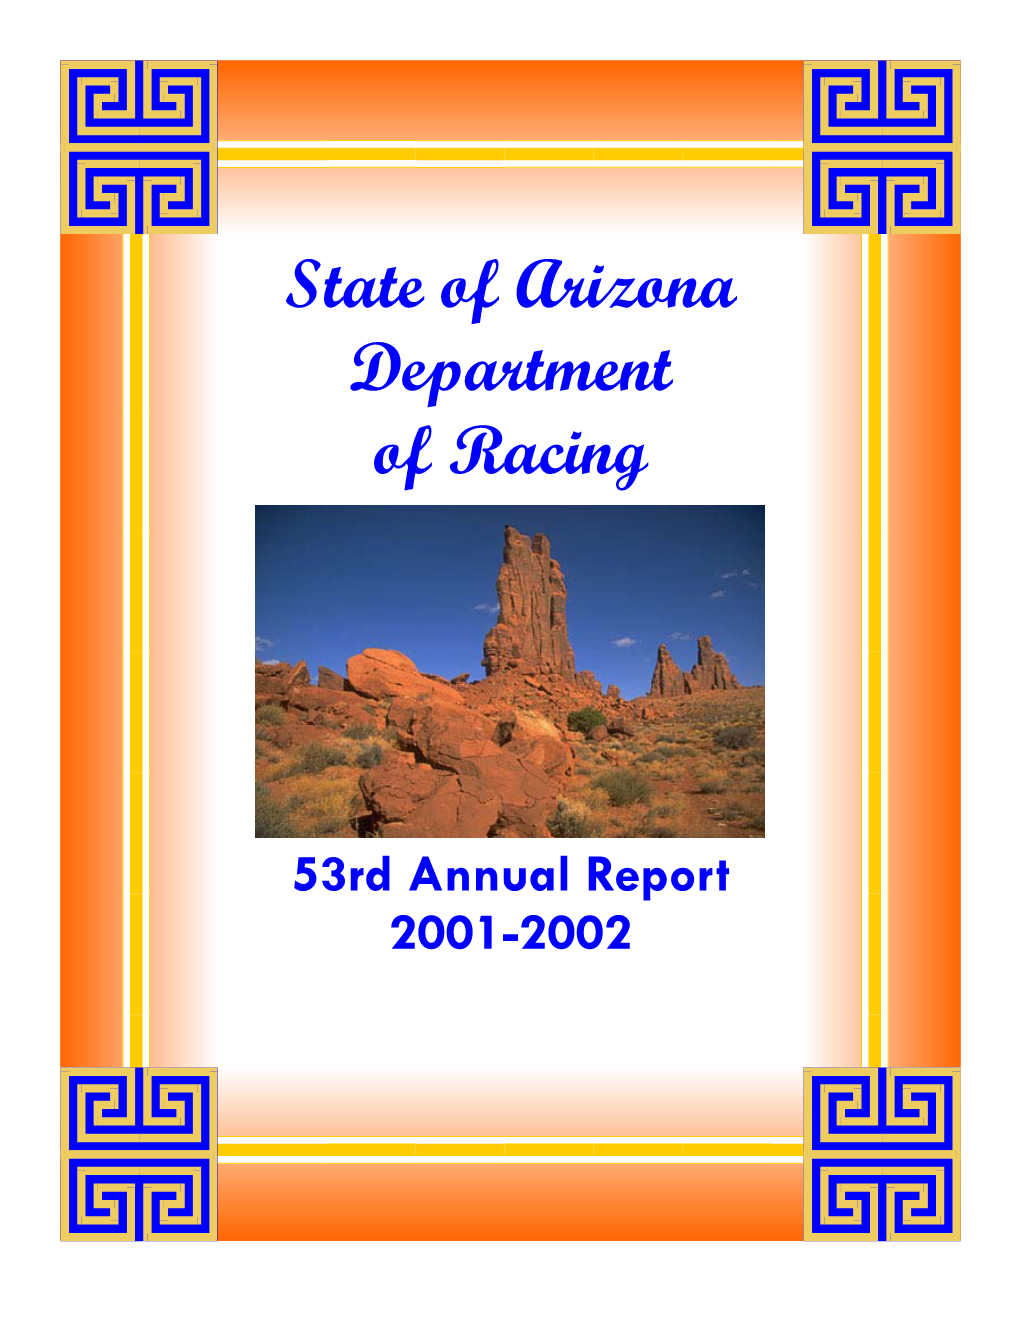 The Arizona Racing Commission by Governor Evan Mecham in 1987, and Served Under Three Subsequent Governors, Moffard, Symington, and Hull